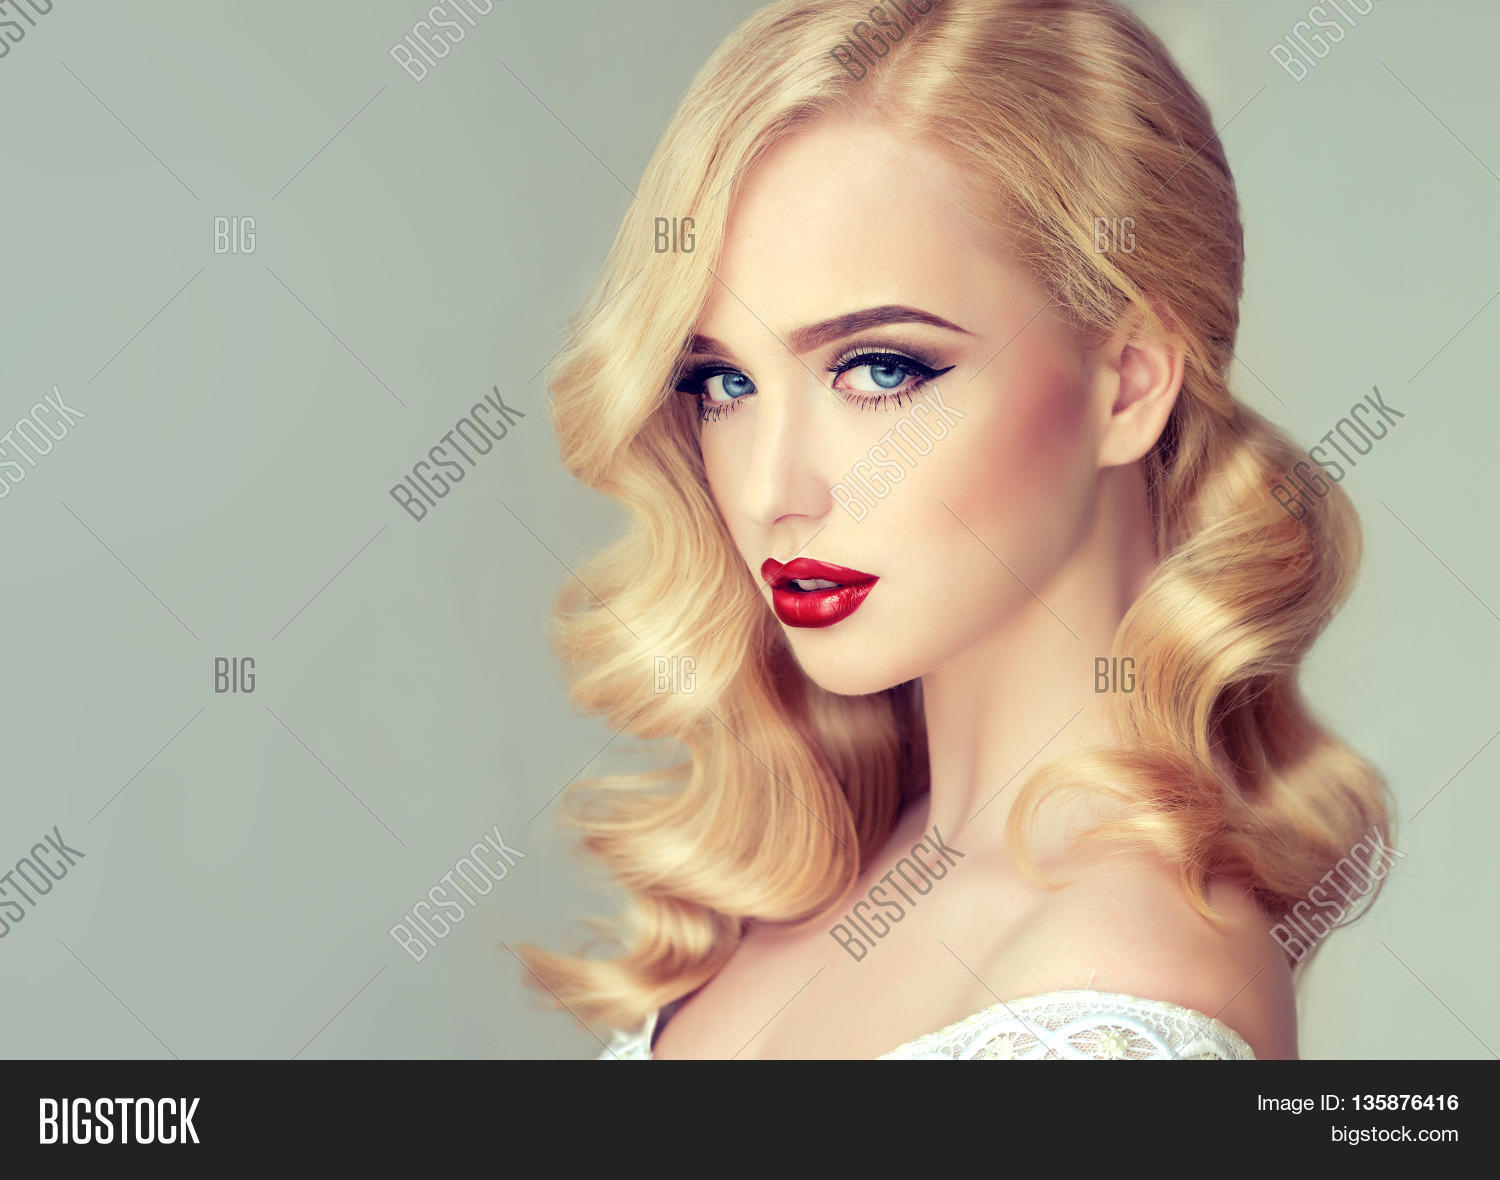 Makeup For Blue Eyes And Blonde Hair Beautiful Blonde Girl Image Photo Free Trial Bigstock